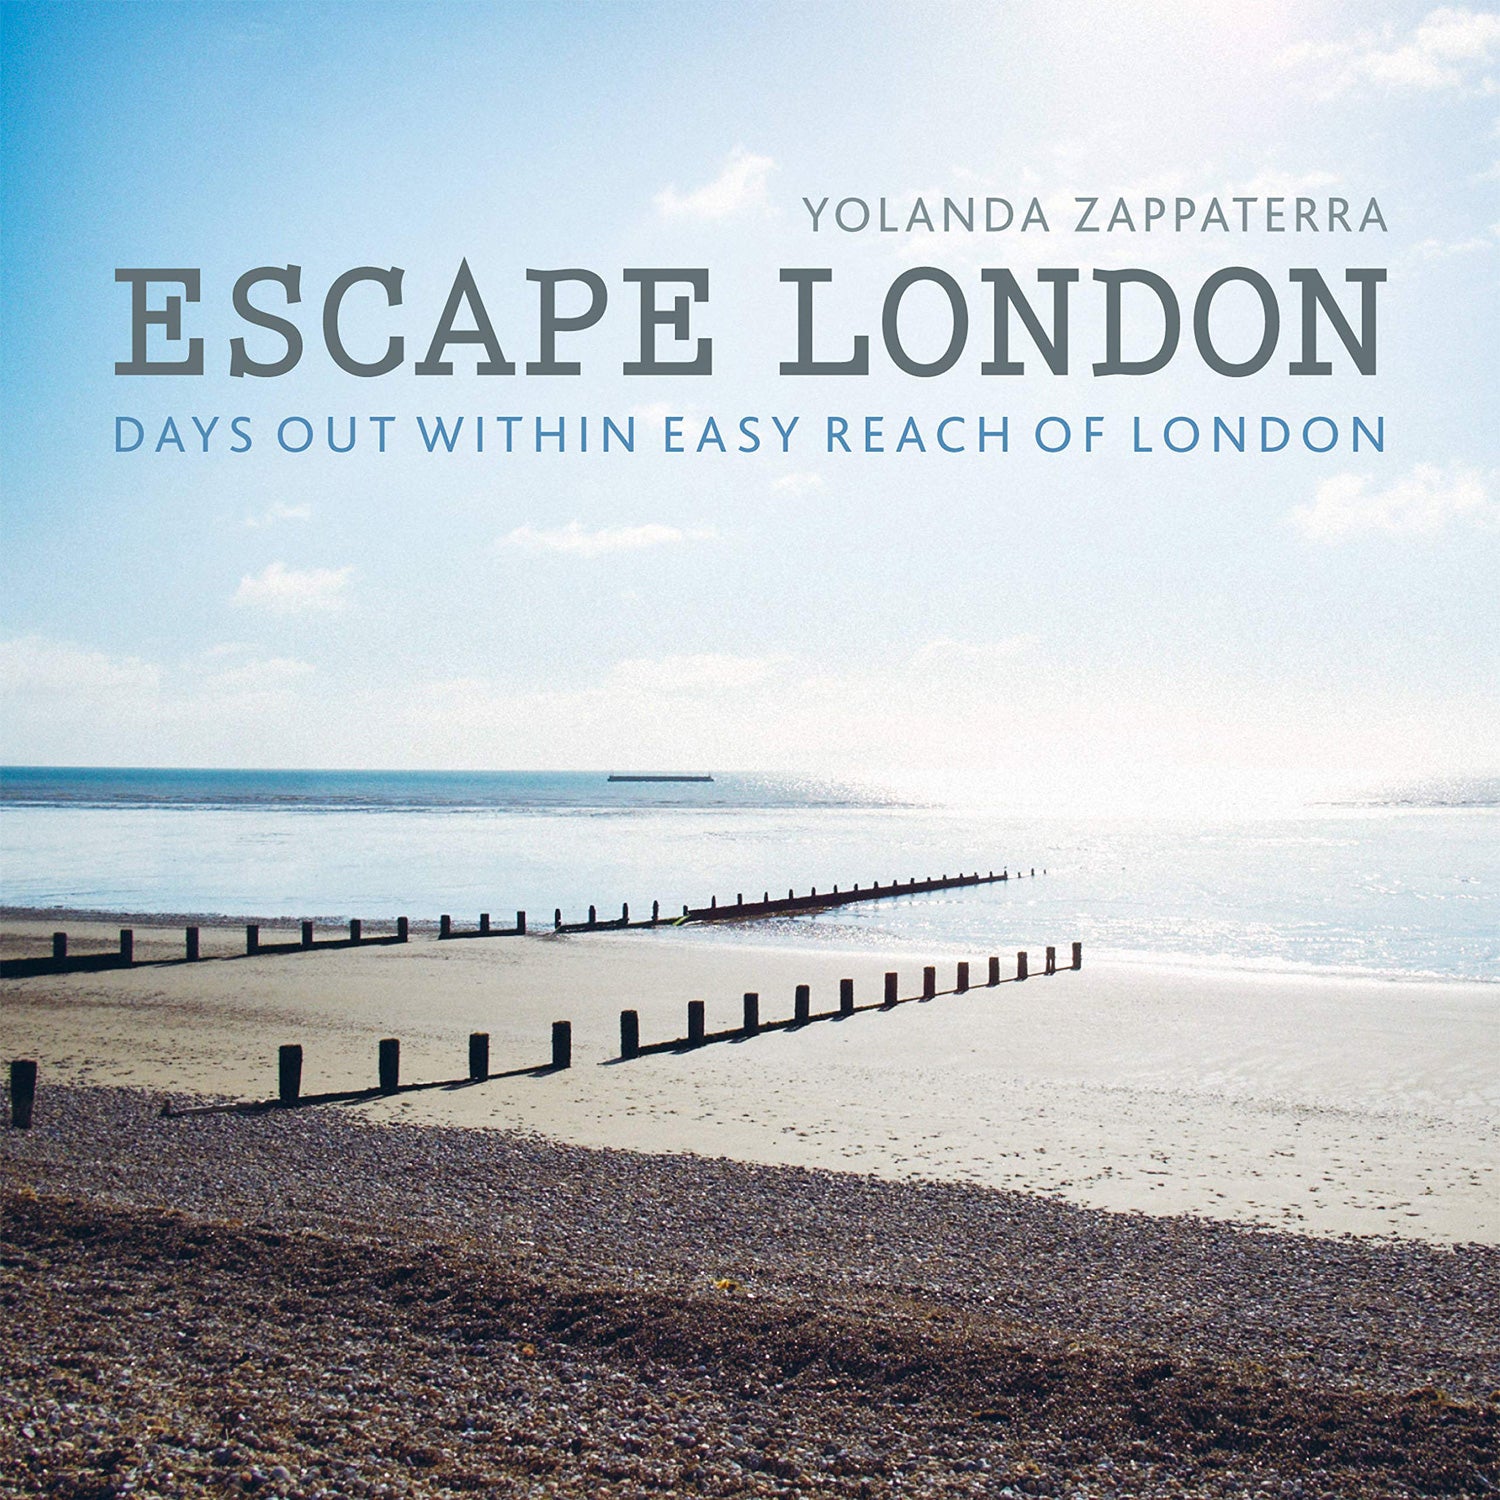 Escape London: Days Out Within Easy Reach Of London Book by Yolanda Zappaterra 1